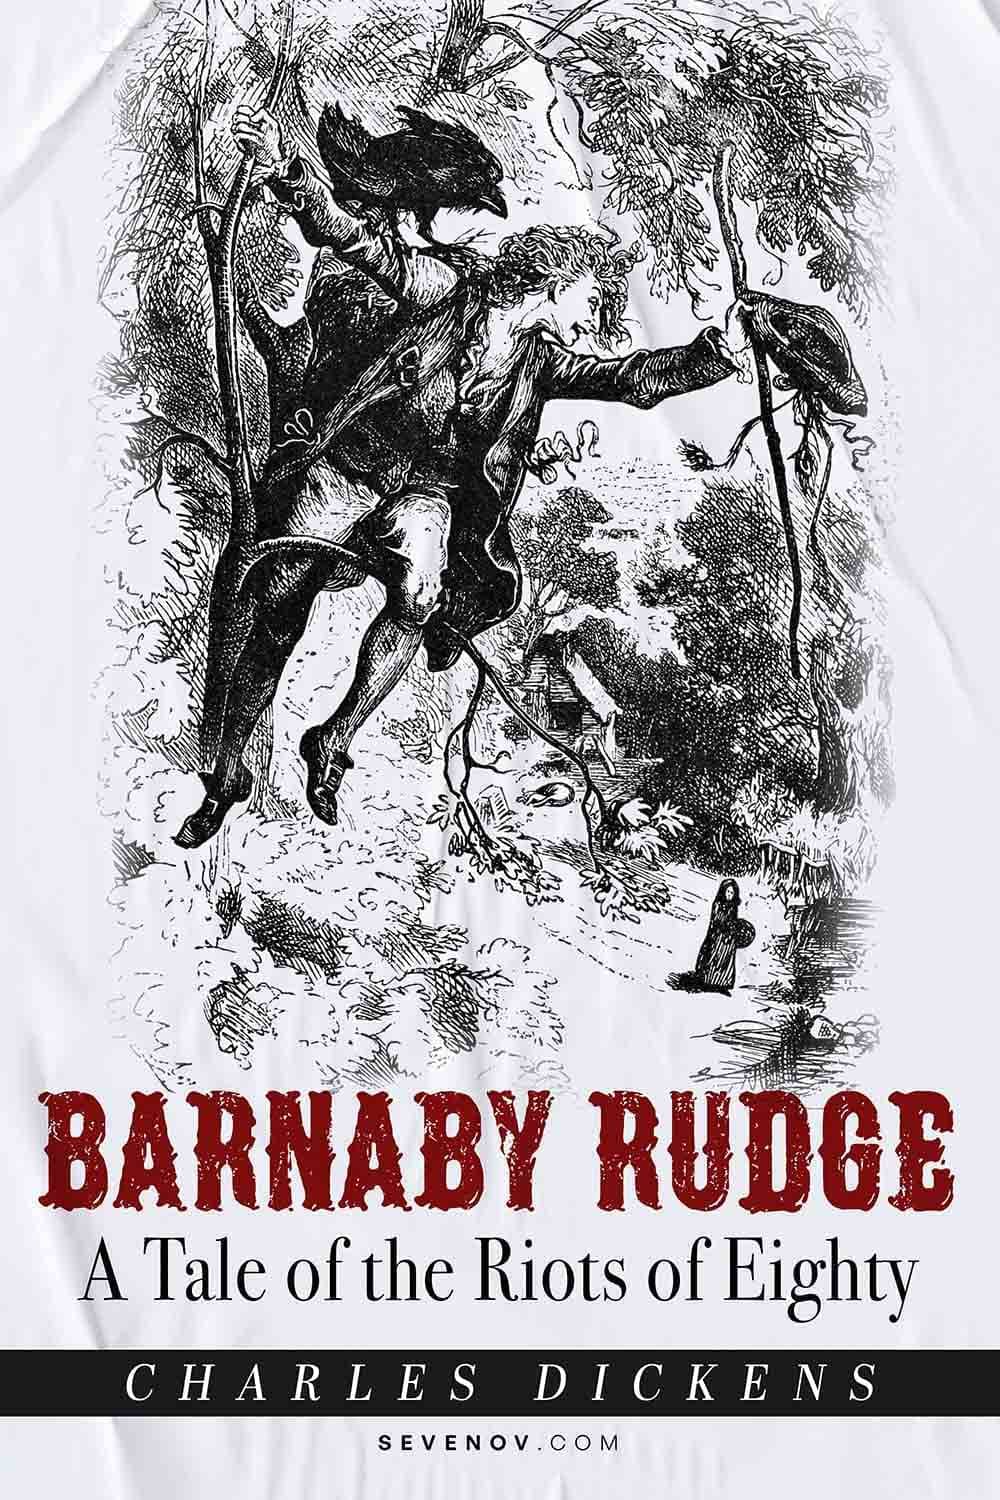 https://pagevio.com/wp-content/uploads/2022/12/barnaby-rudge-a-tale-of-the-riots-of-eighty-20221227.jpg